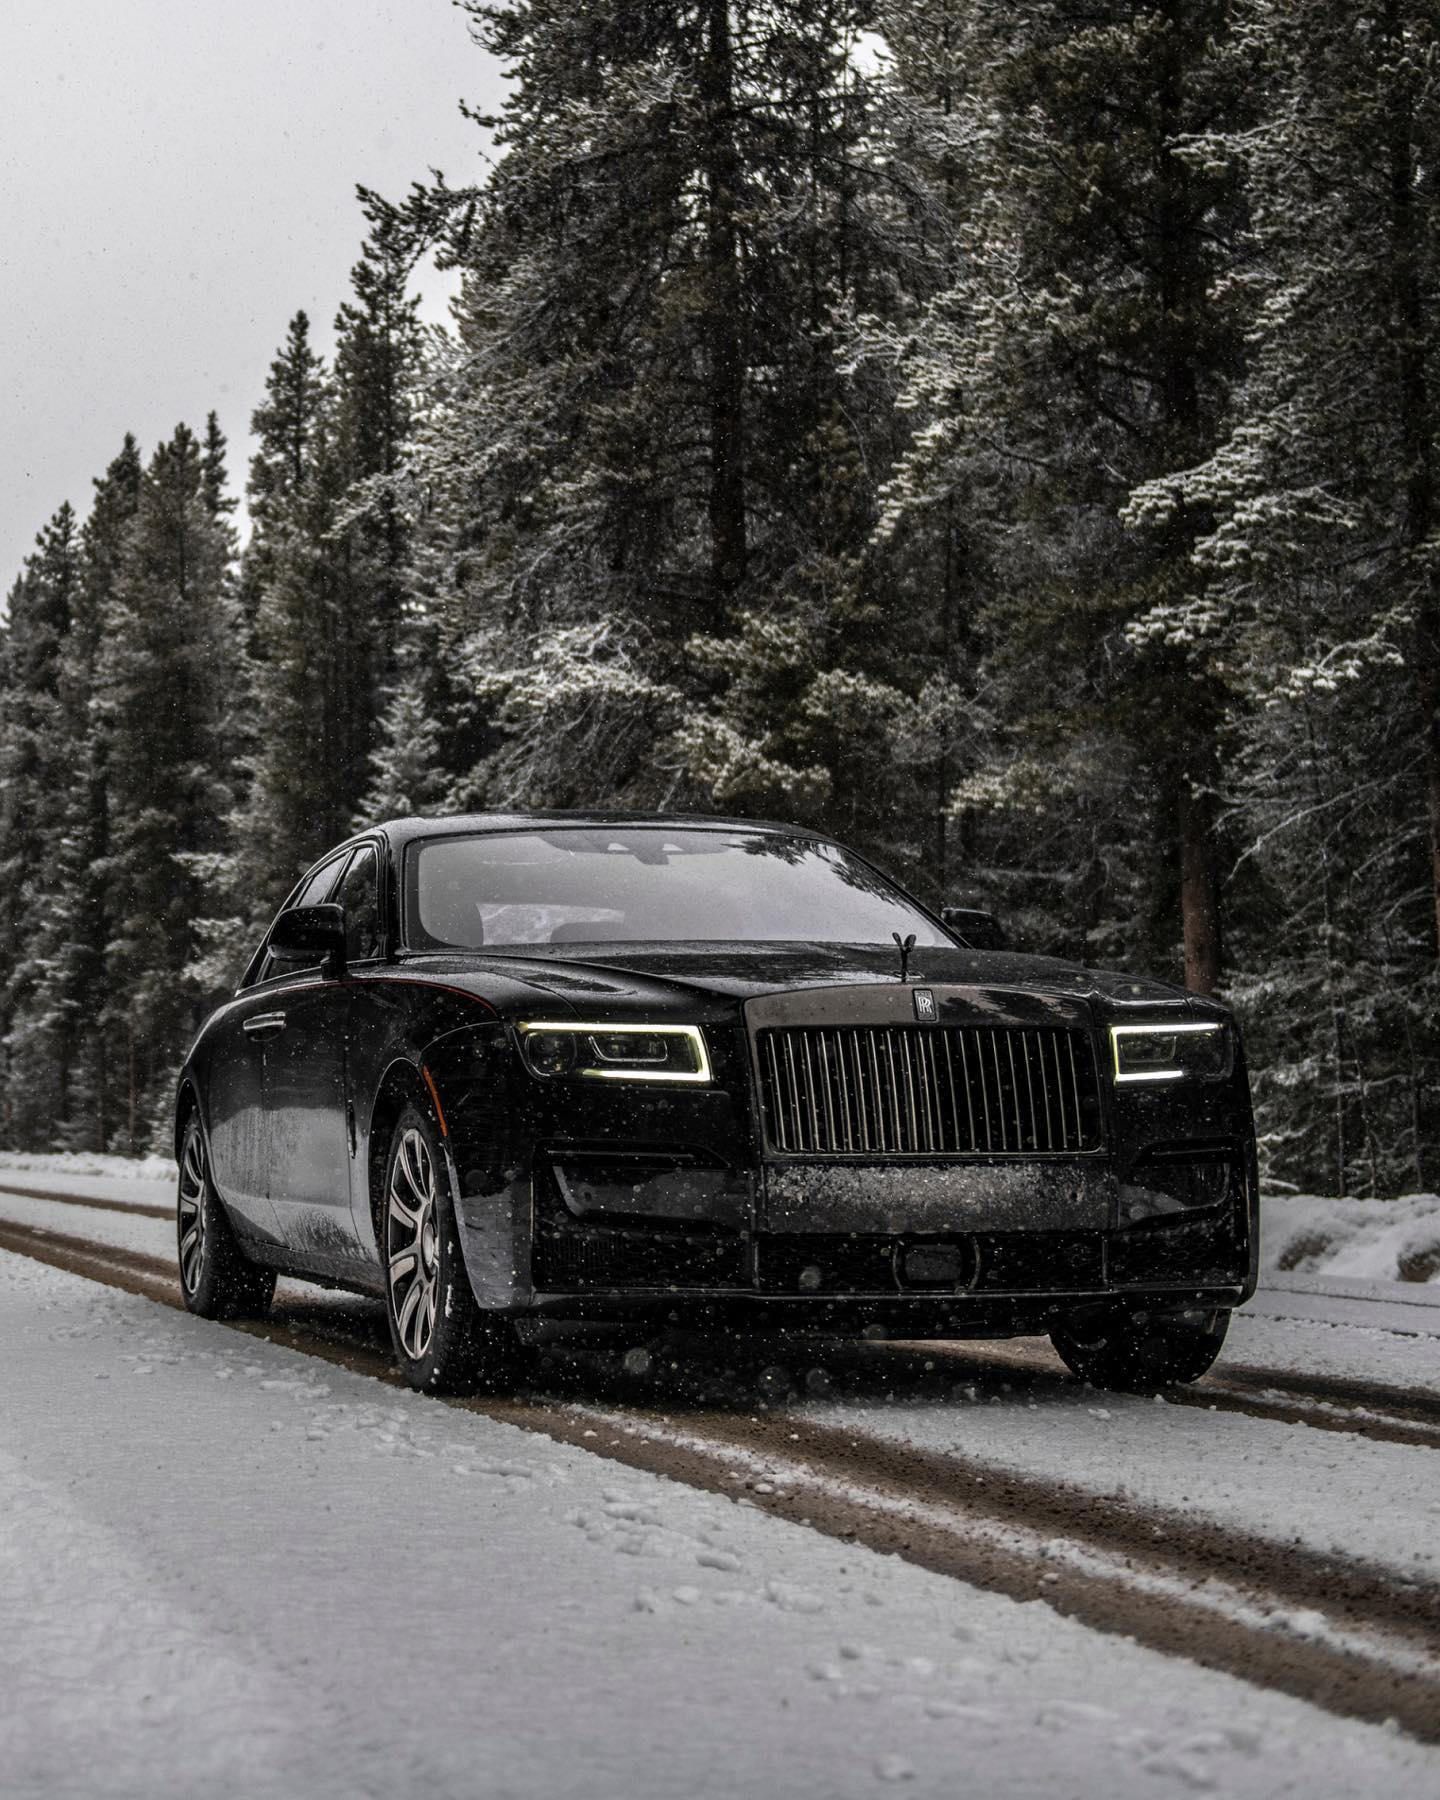 image  1 Rolls-Royce Motor Cars - Upon snow-covered grounds, Black Badge Ghost has an amplified, rebellious p